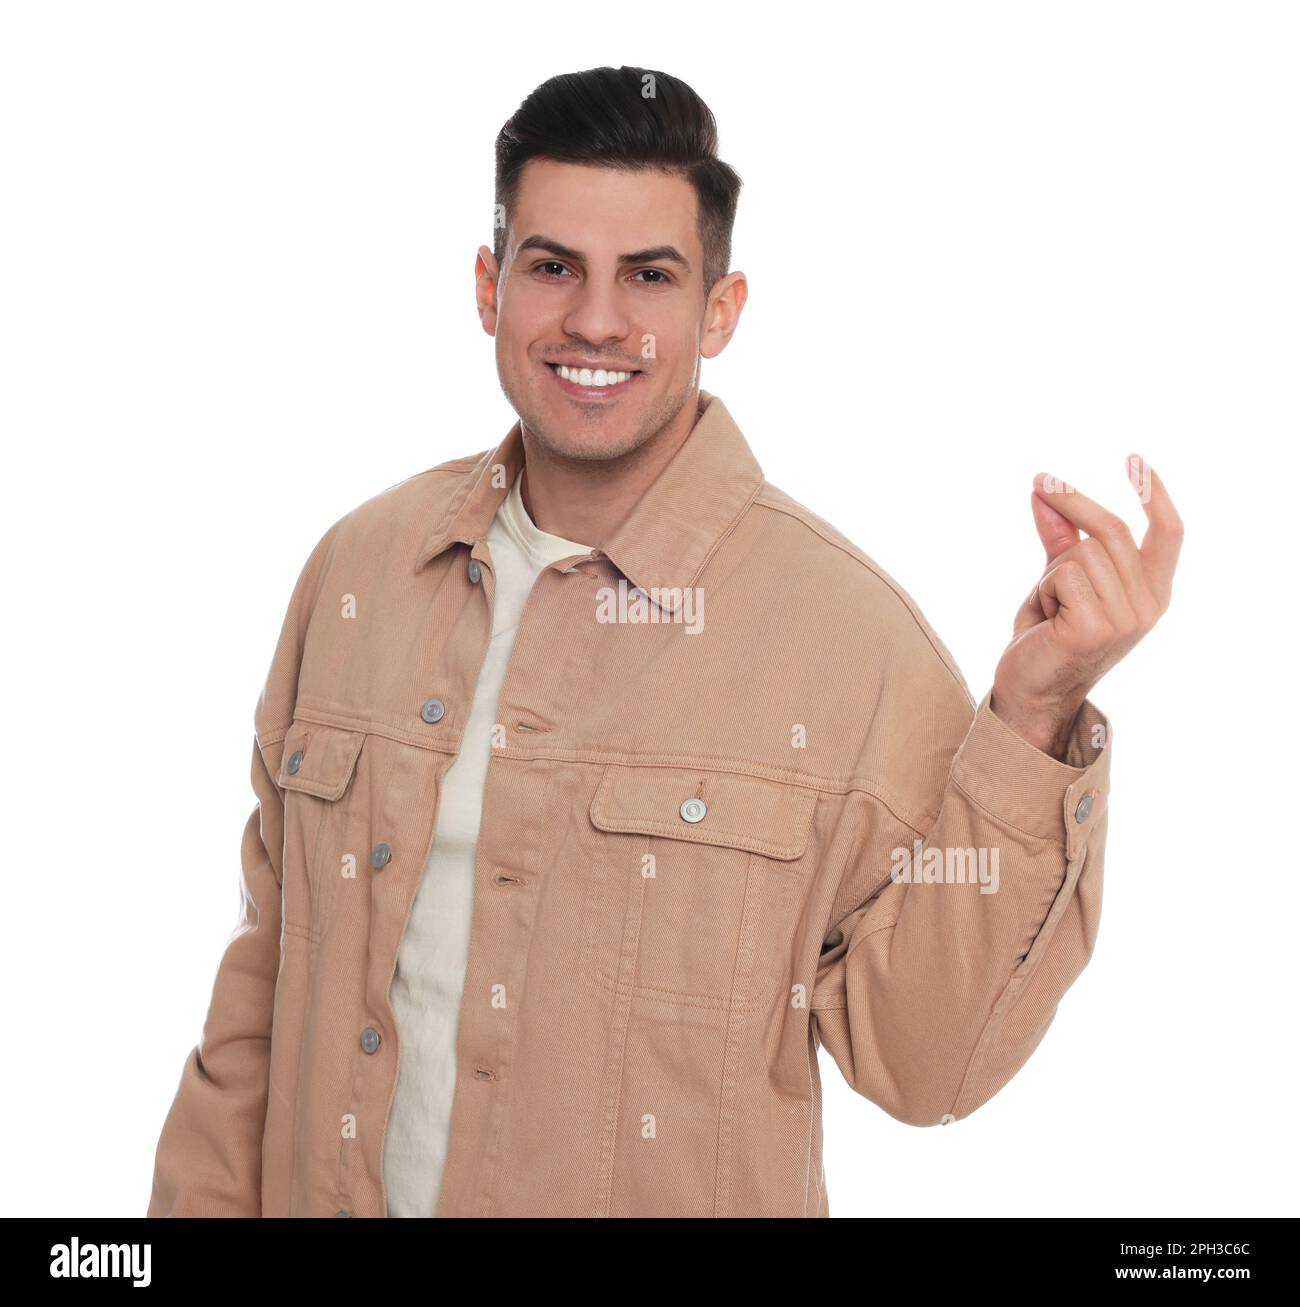 Handsome man snapping fingers on white background Stock Photo